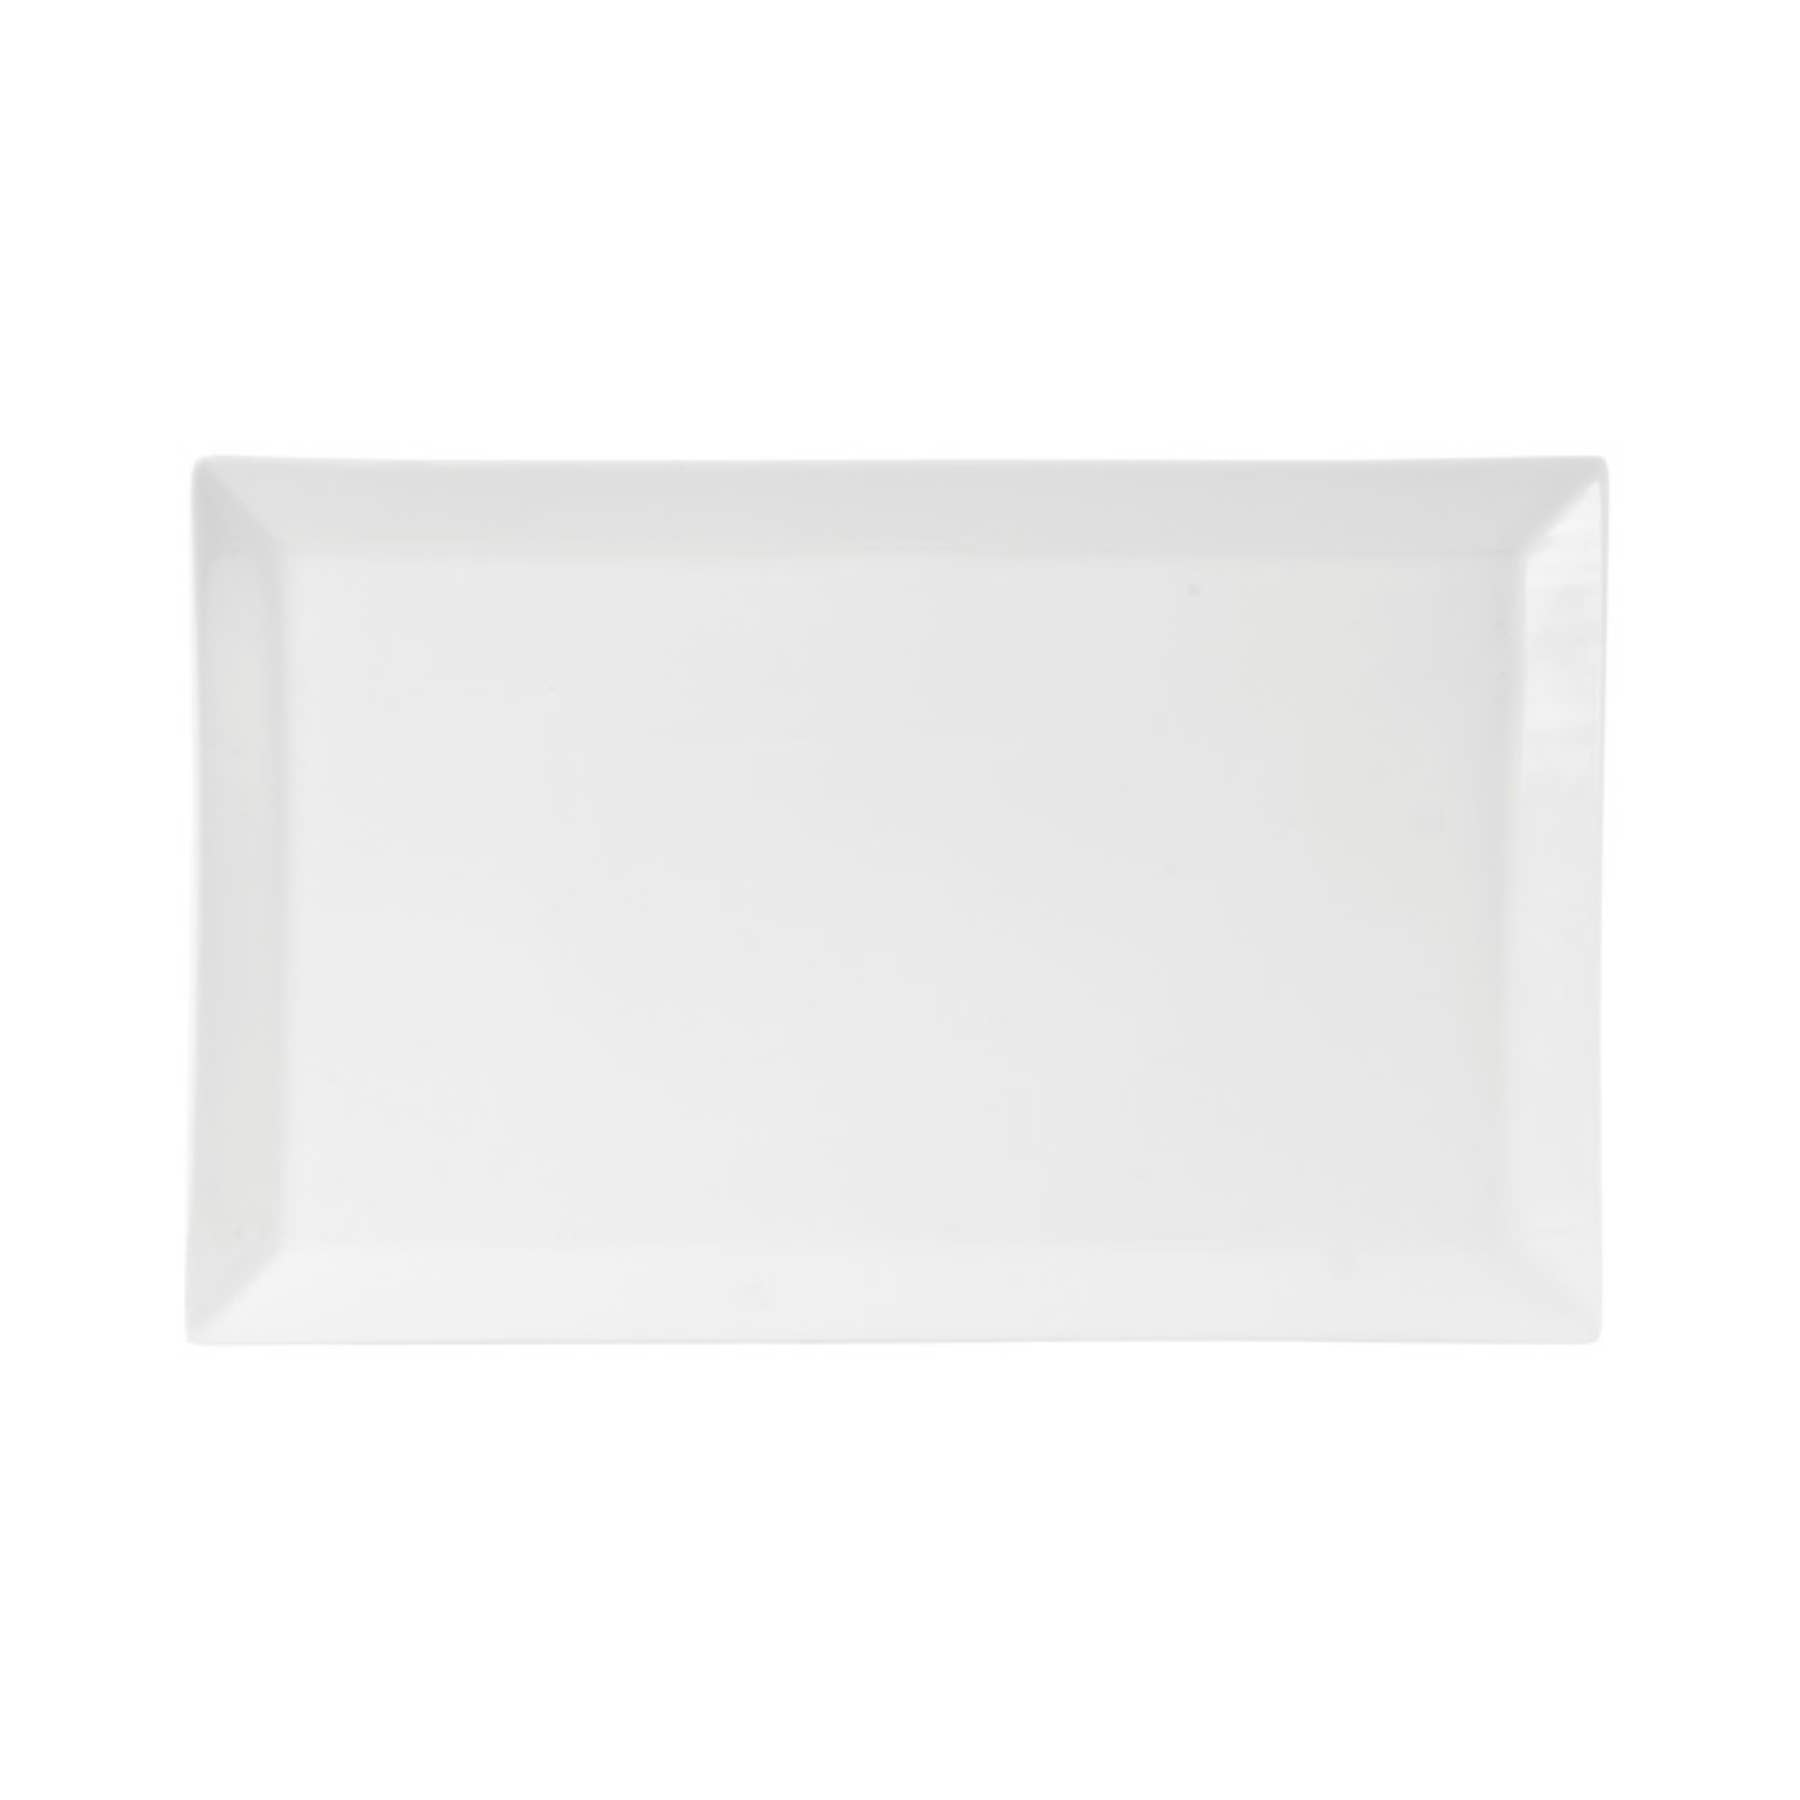 Everyday White Rectangular Rim Platter 18In Timothy De Clue Collection